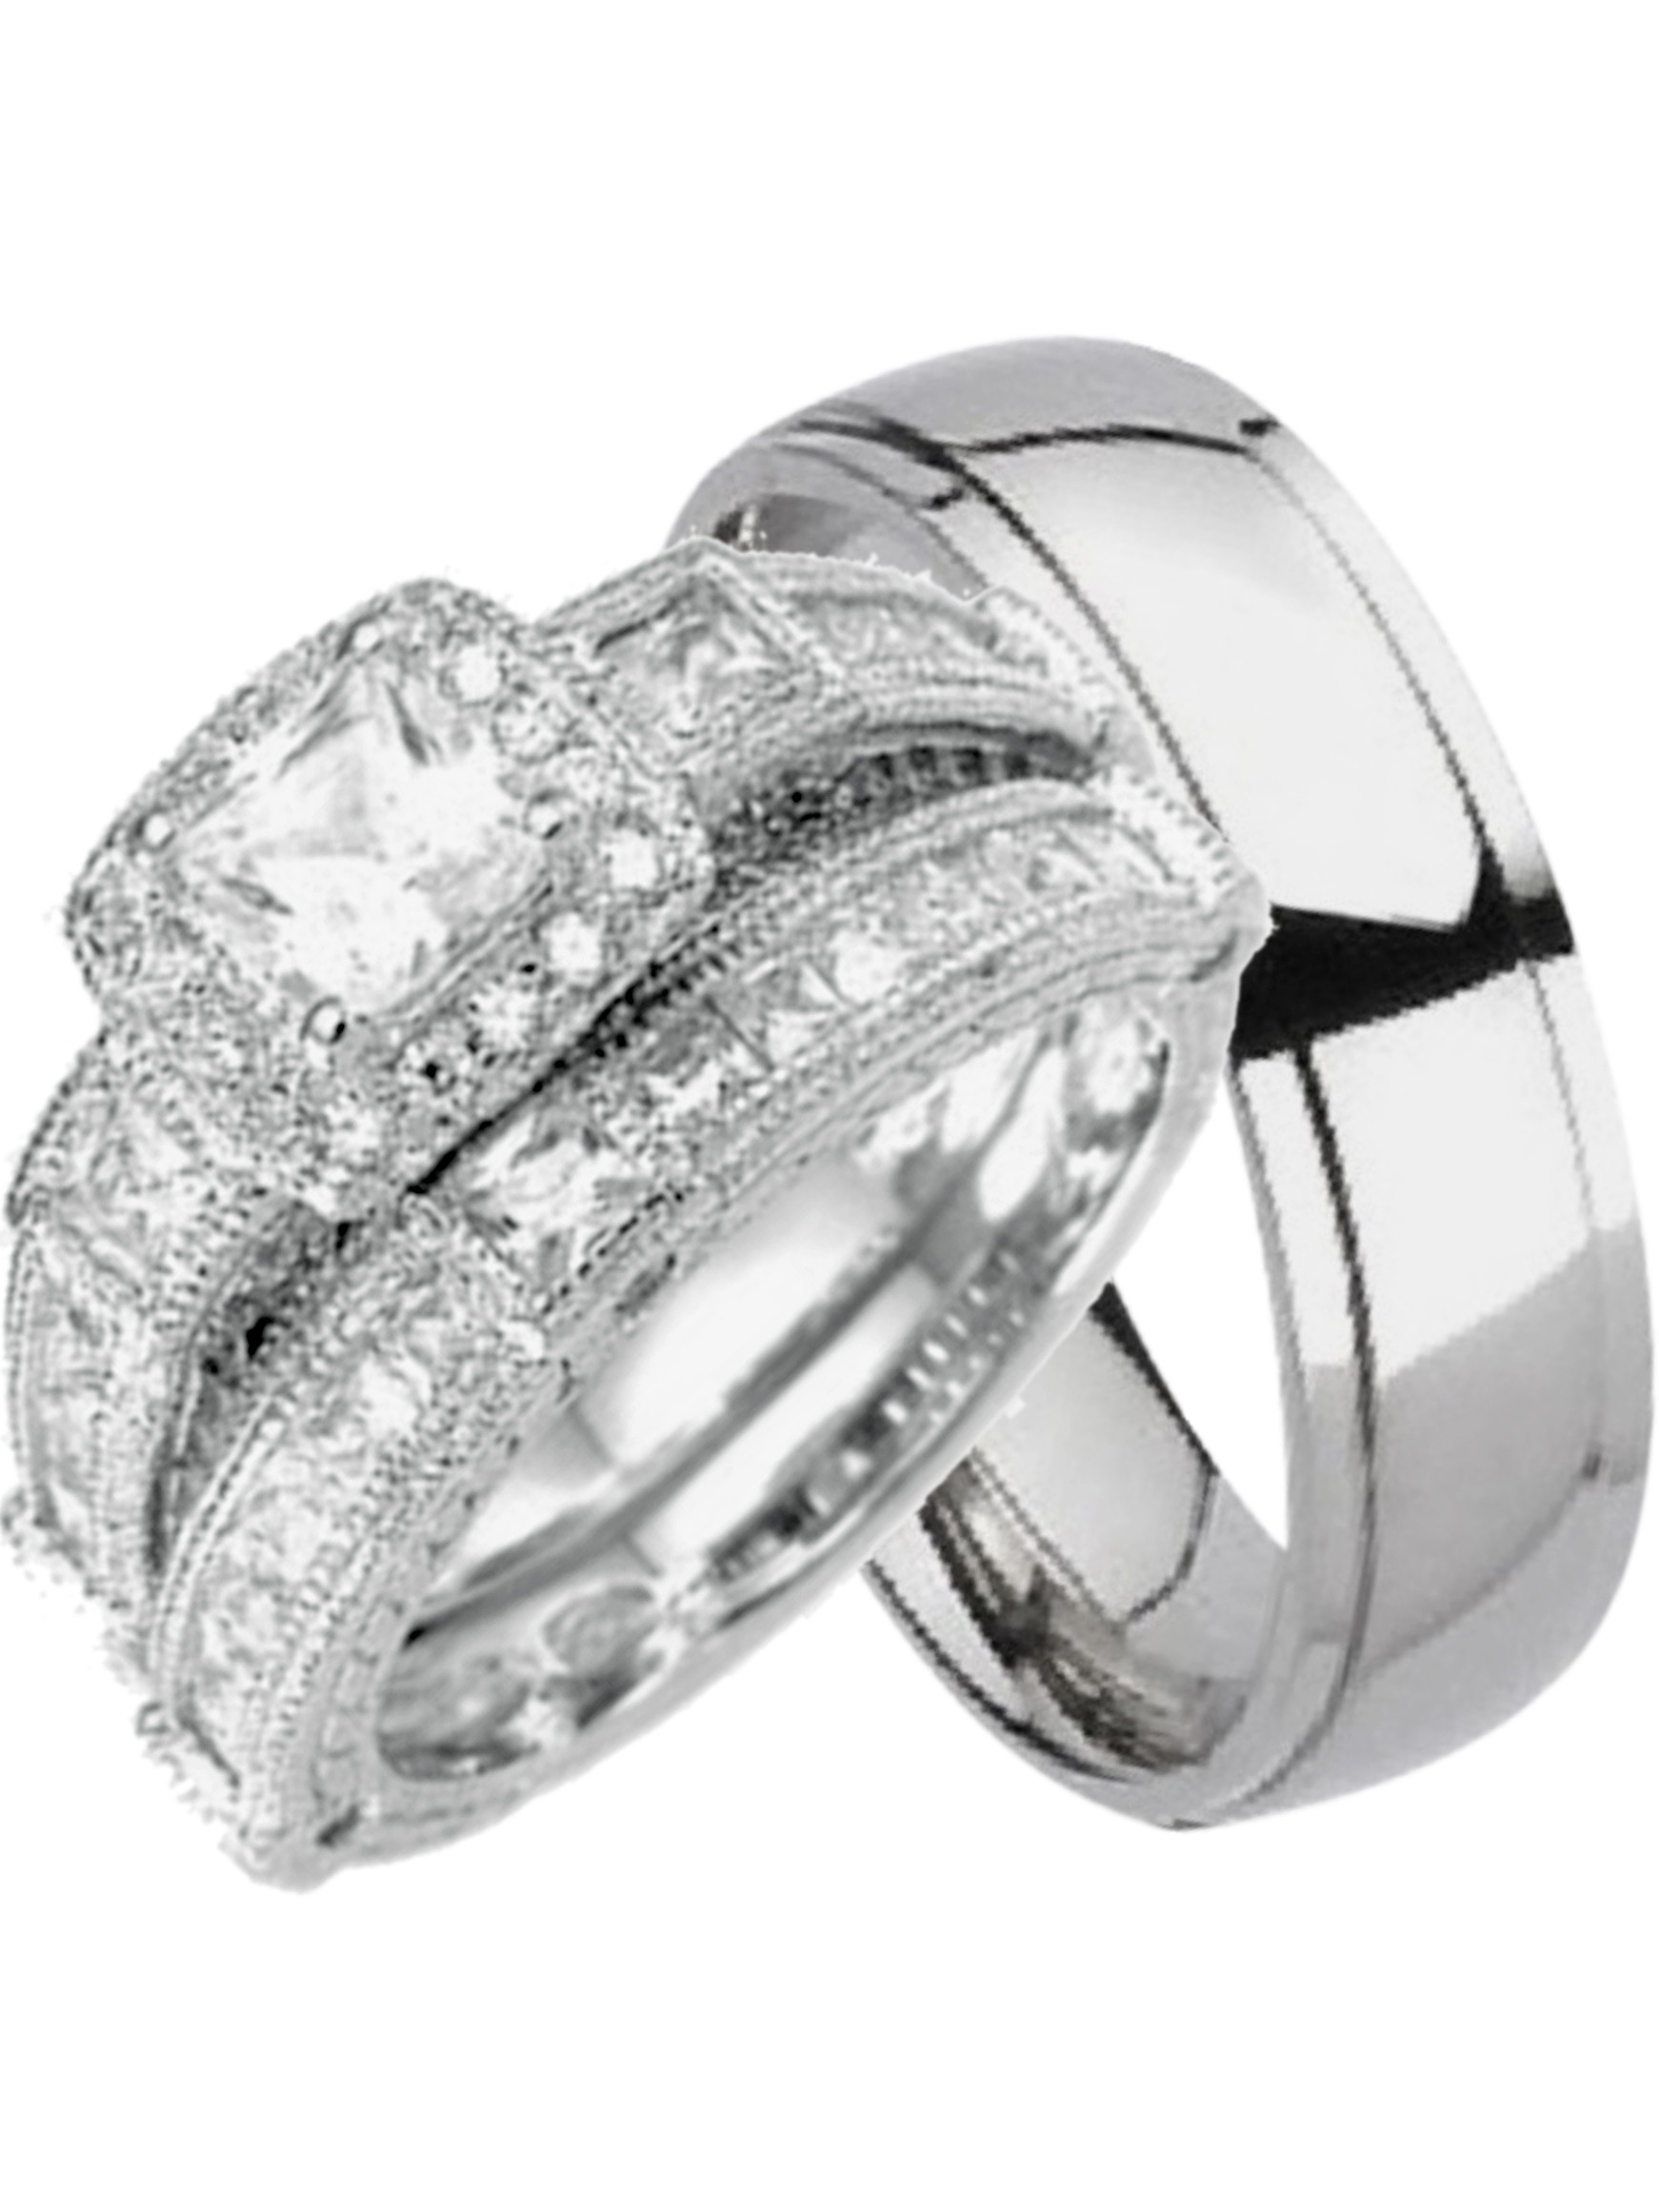 Wedding Ring Sets For Her And Him
 LaRaso & Co His and Hers Wedding Sets Silver Titanium 3